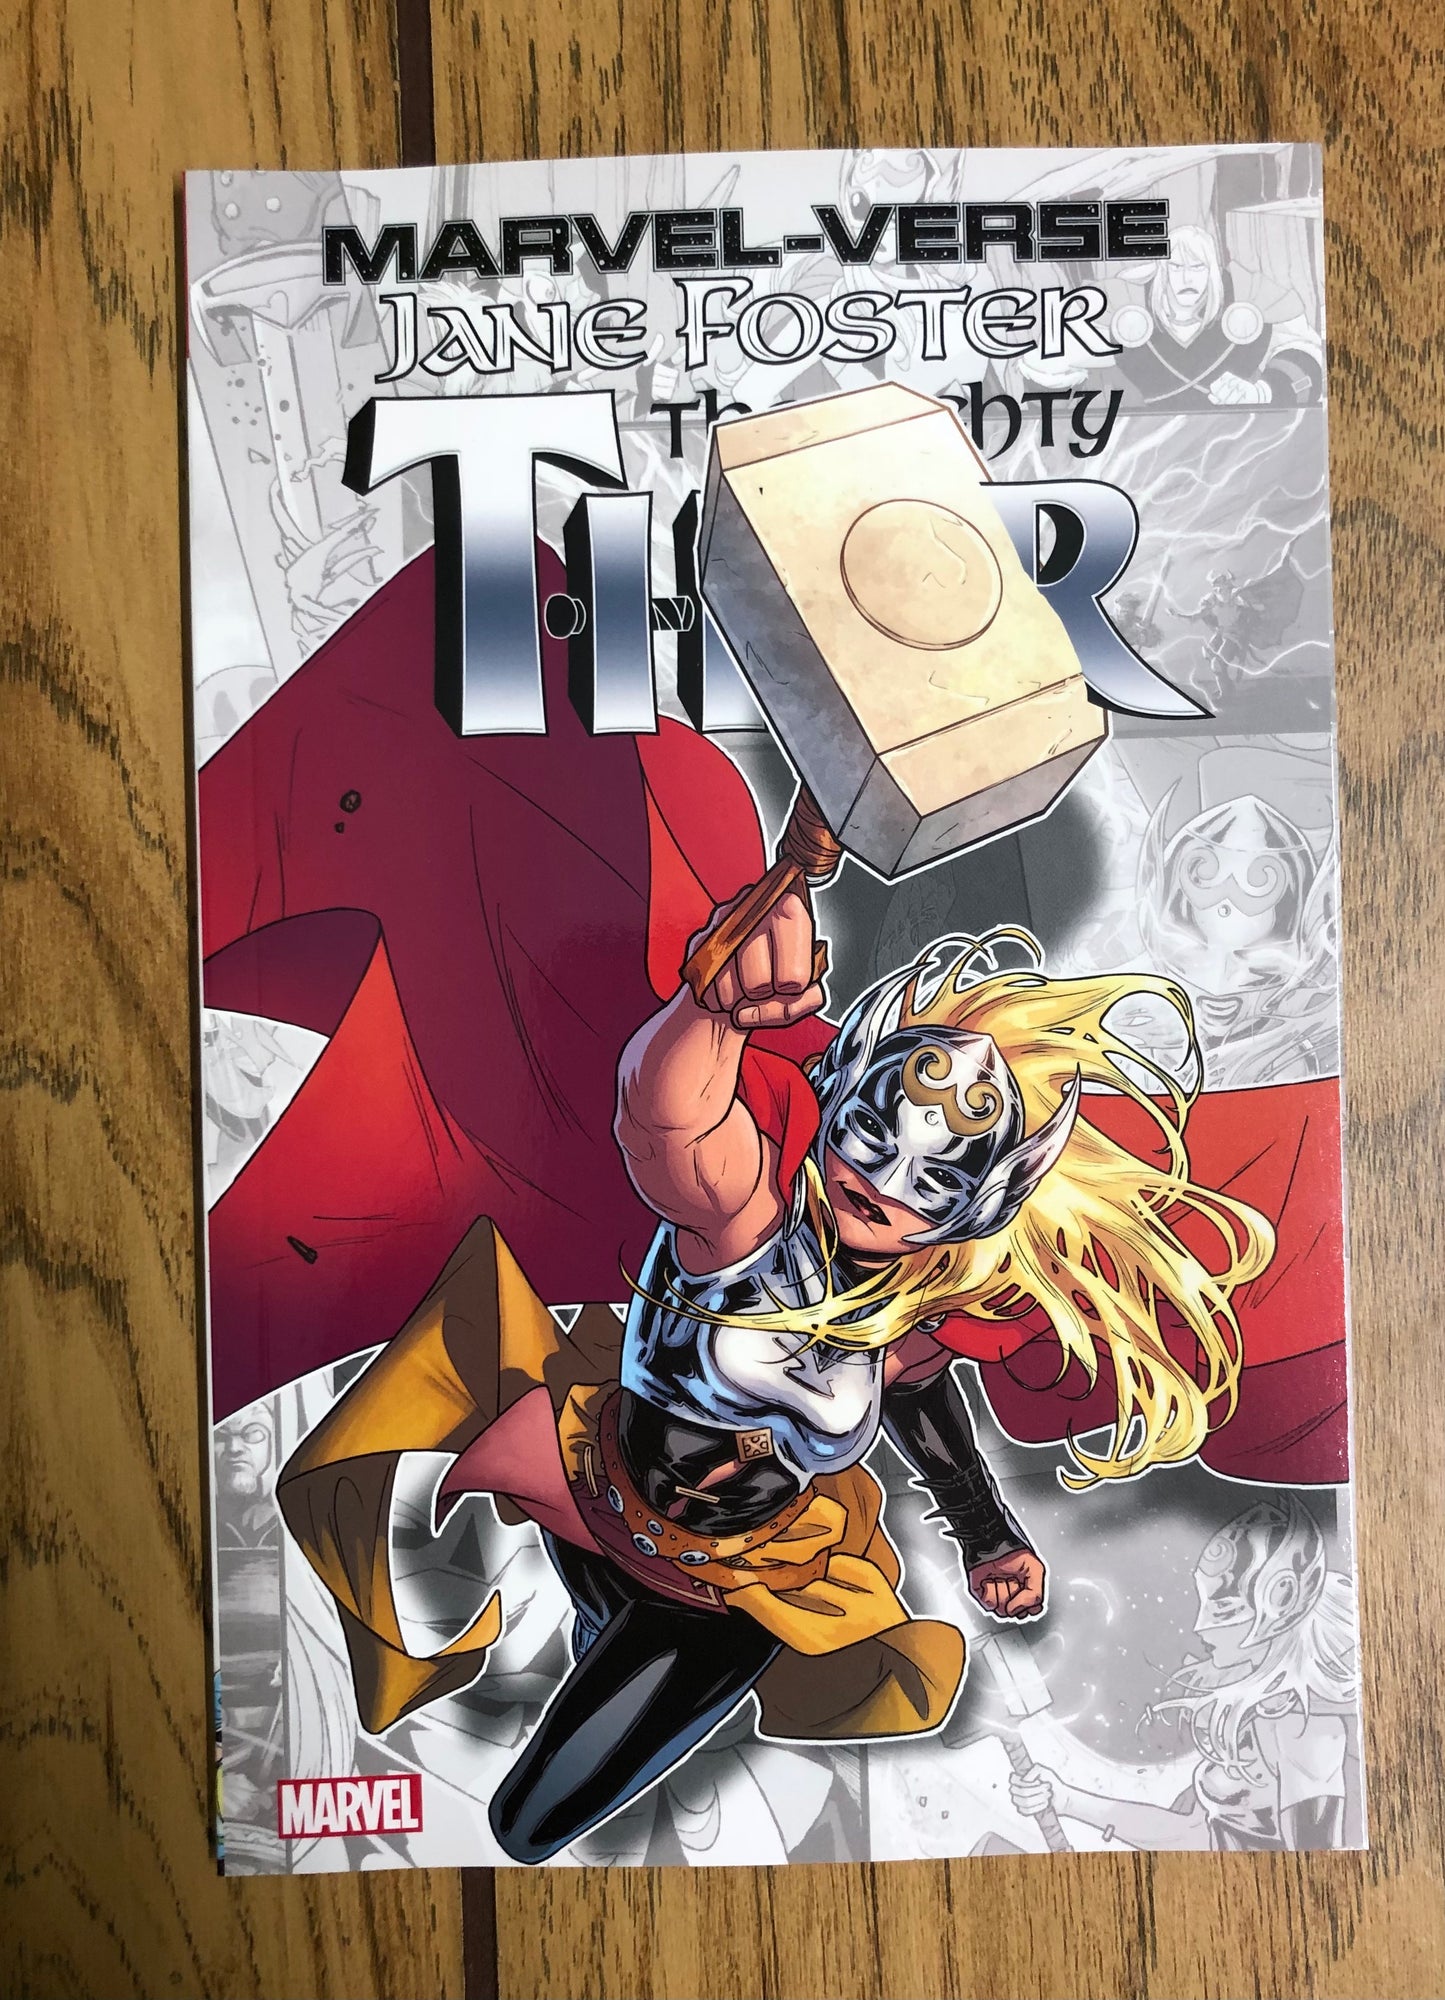 Marvel-Verse: Jane Foster the Mighty Thor